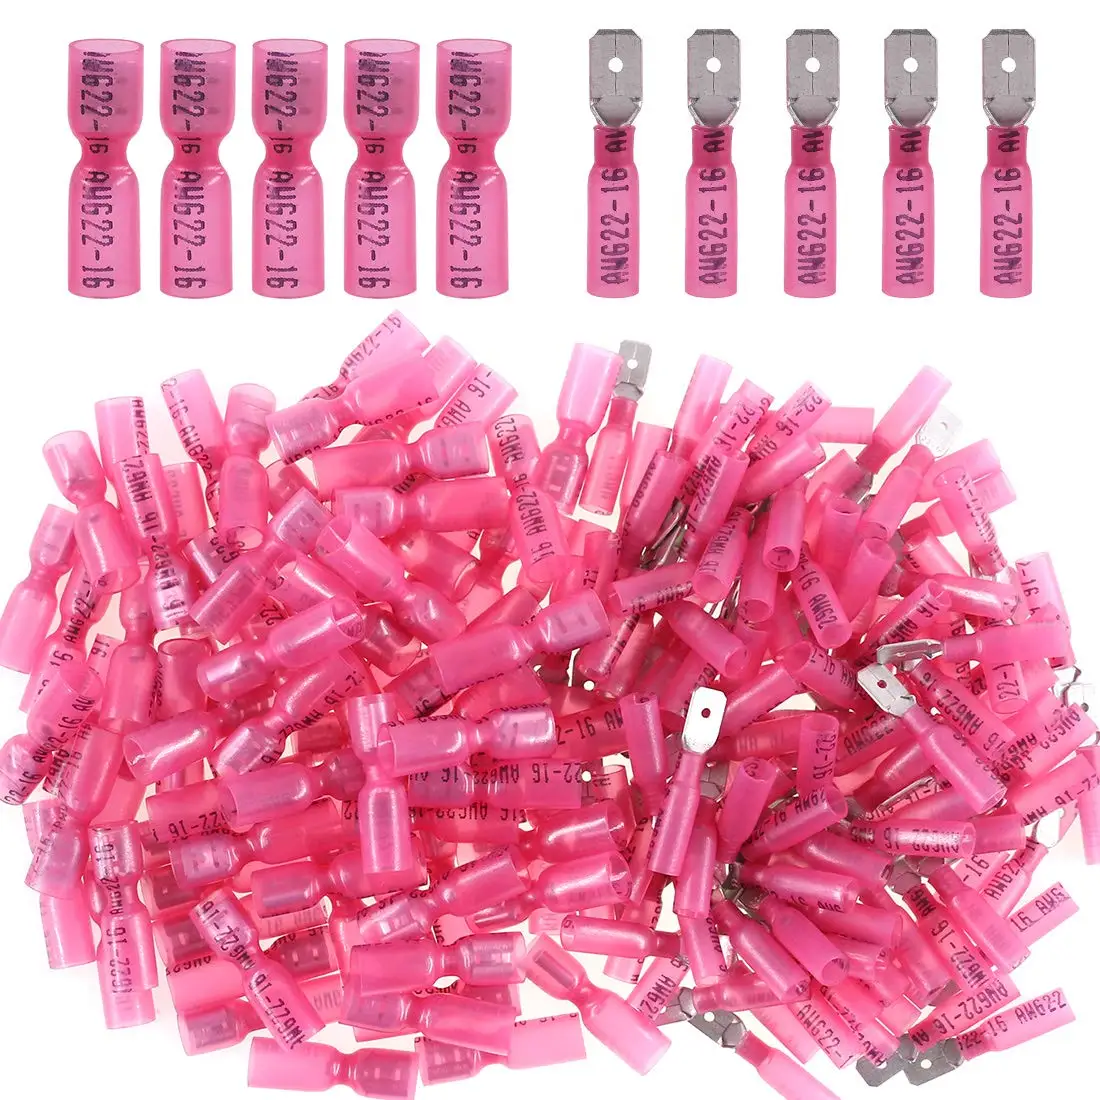 

200/50Pcs Heat Shrink Crimp Terminals Kit Insulated Butt Wire Connector Electrical Cable Male Female Docking Spade Terminal